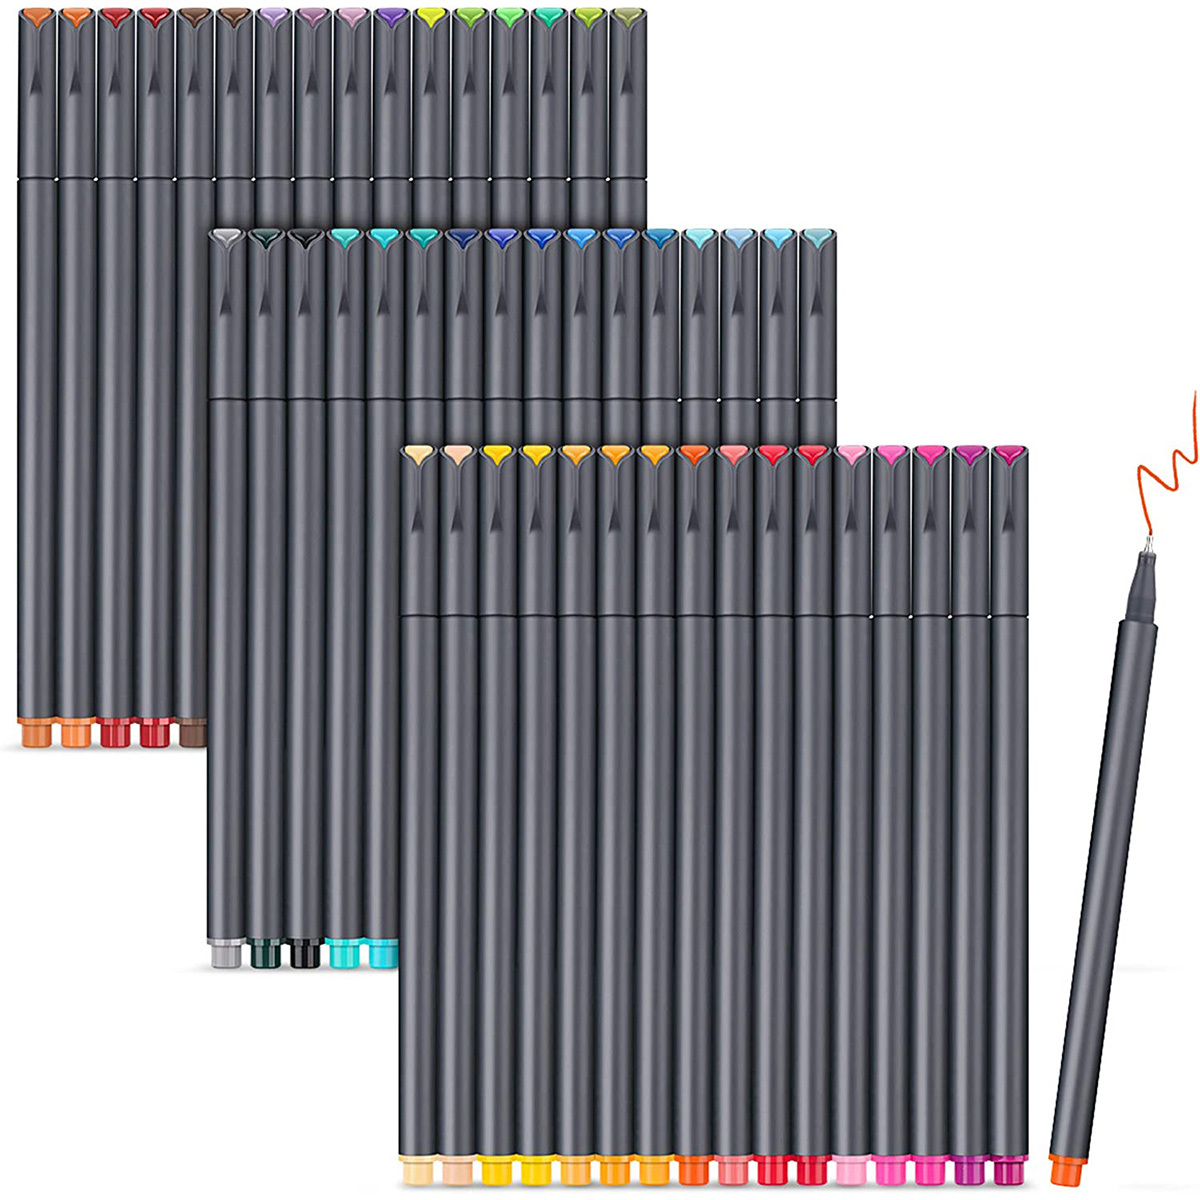 Colorful Fine Point Pens for Bullet Journaling, Note Nepal